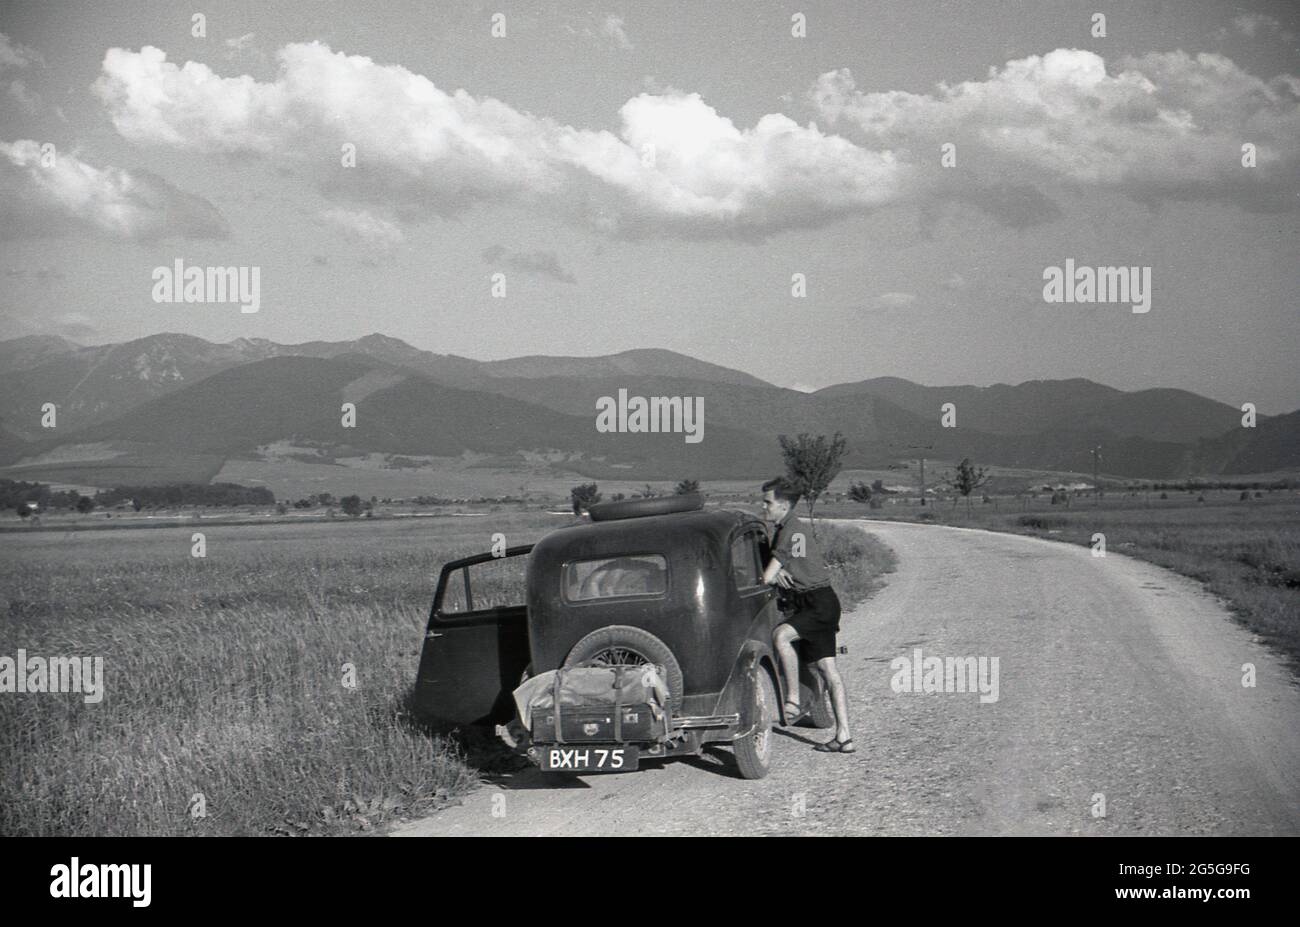 1930s, historical, touring Czechoslavia pre-ww2, a young man standing on a country road, by his British car, a Morris 8, looking over the surrounding landscape. After WW1 and the establishment of an independent Czechoslovakia state, several border areas of the country, including the historical western area of Bohemia, were now occupied by a majority of German speakers, known by the historical German name as the Sudentenland. 1938 saw the Sudeten crisis, the Munich Agreement and then WW2. Stock Photo